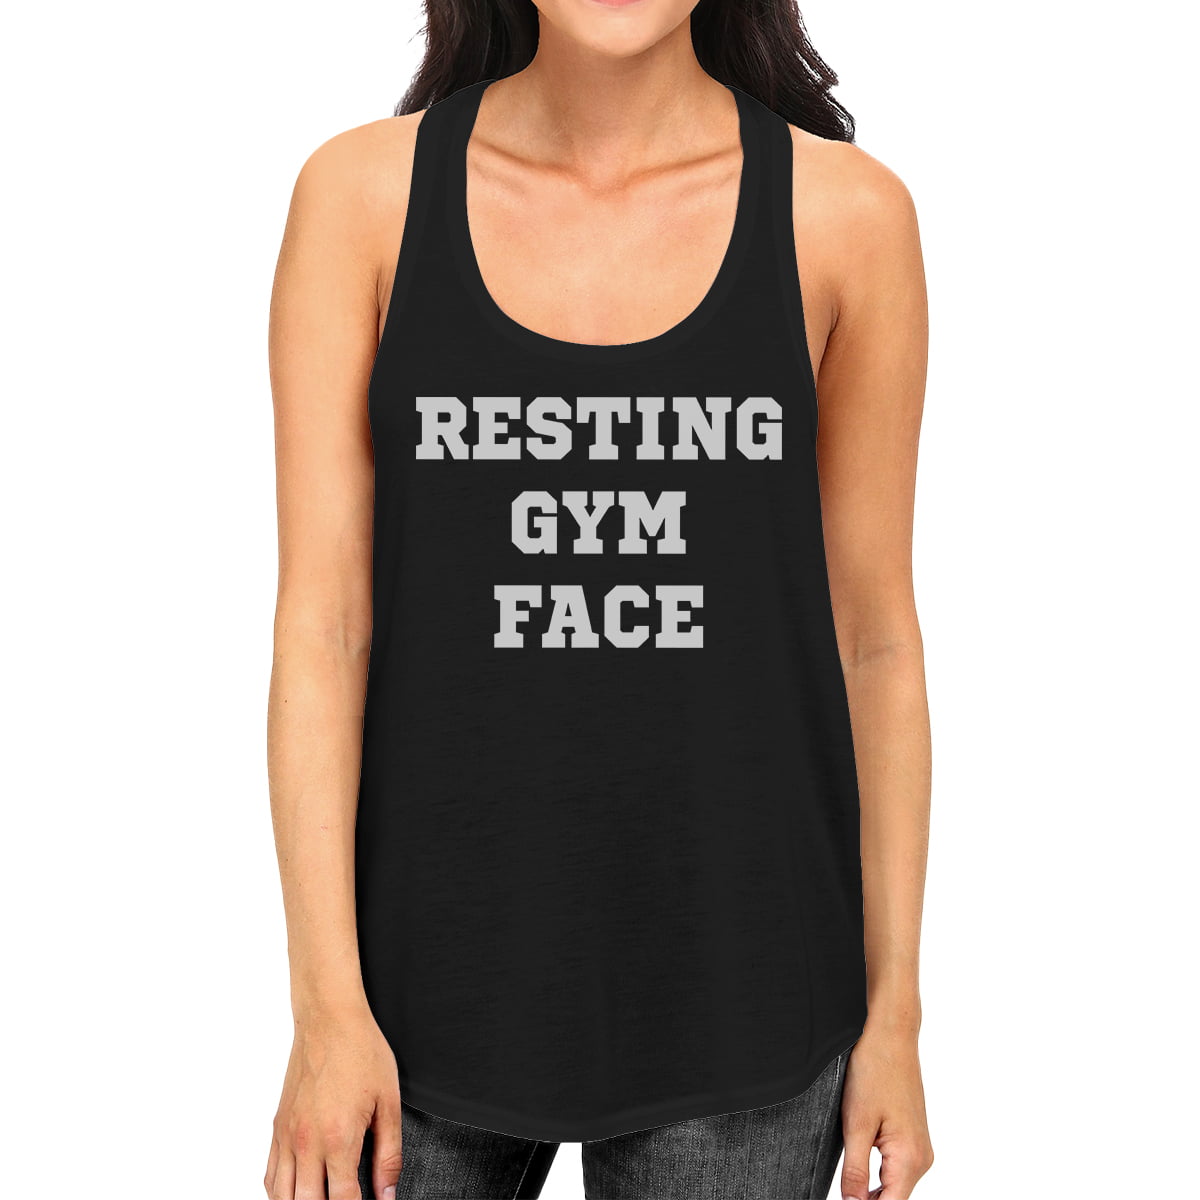 WINGZOO Womens Workout Tank Tops-I Could Deadlift You Funny Saying Fitness Gym Racerback Sleeveless Shirts for Women